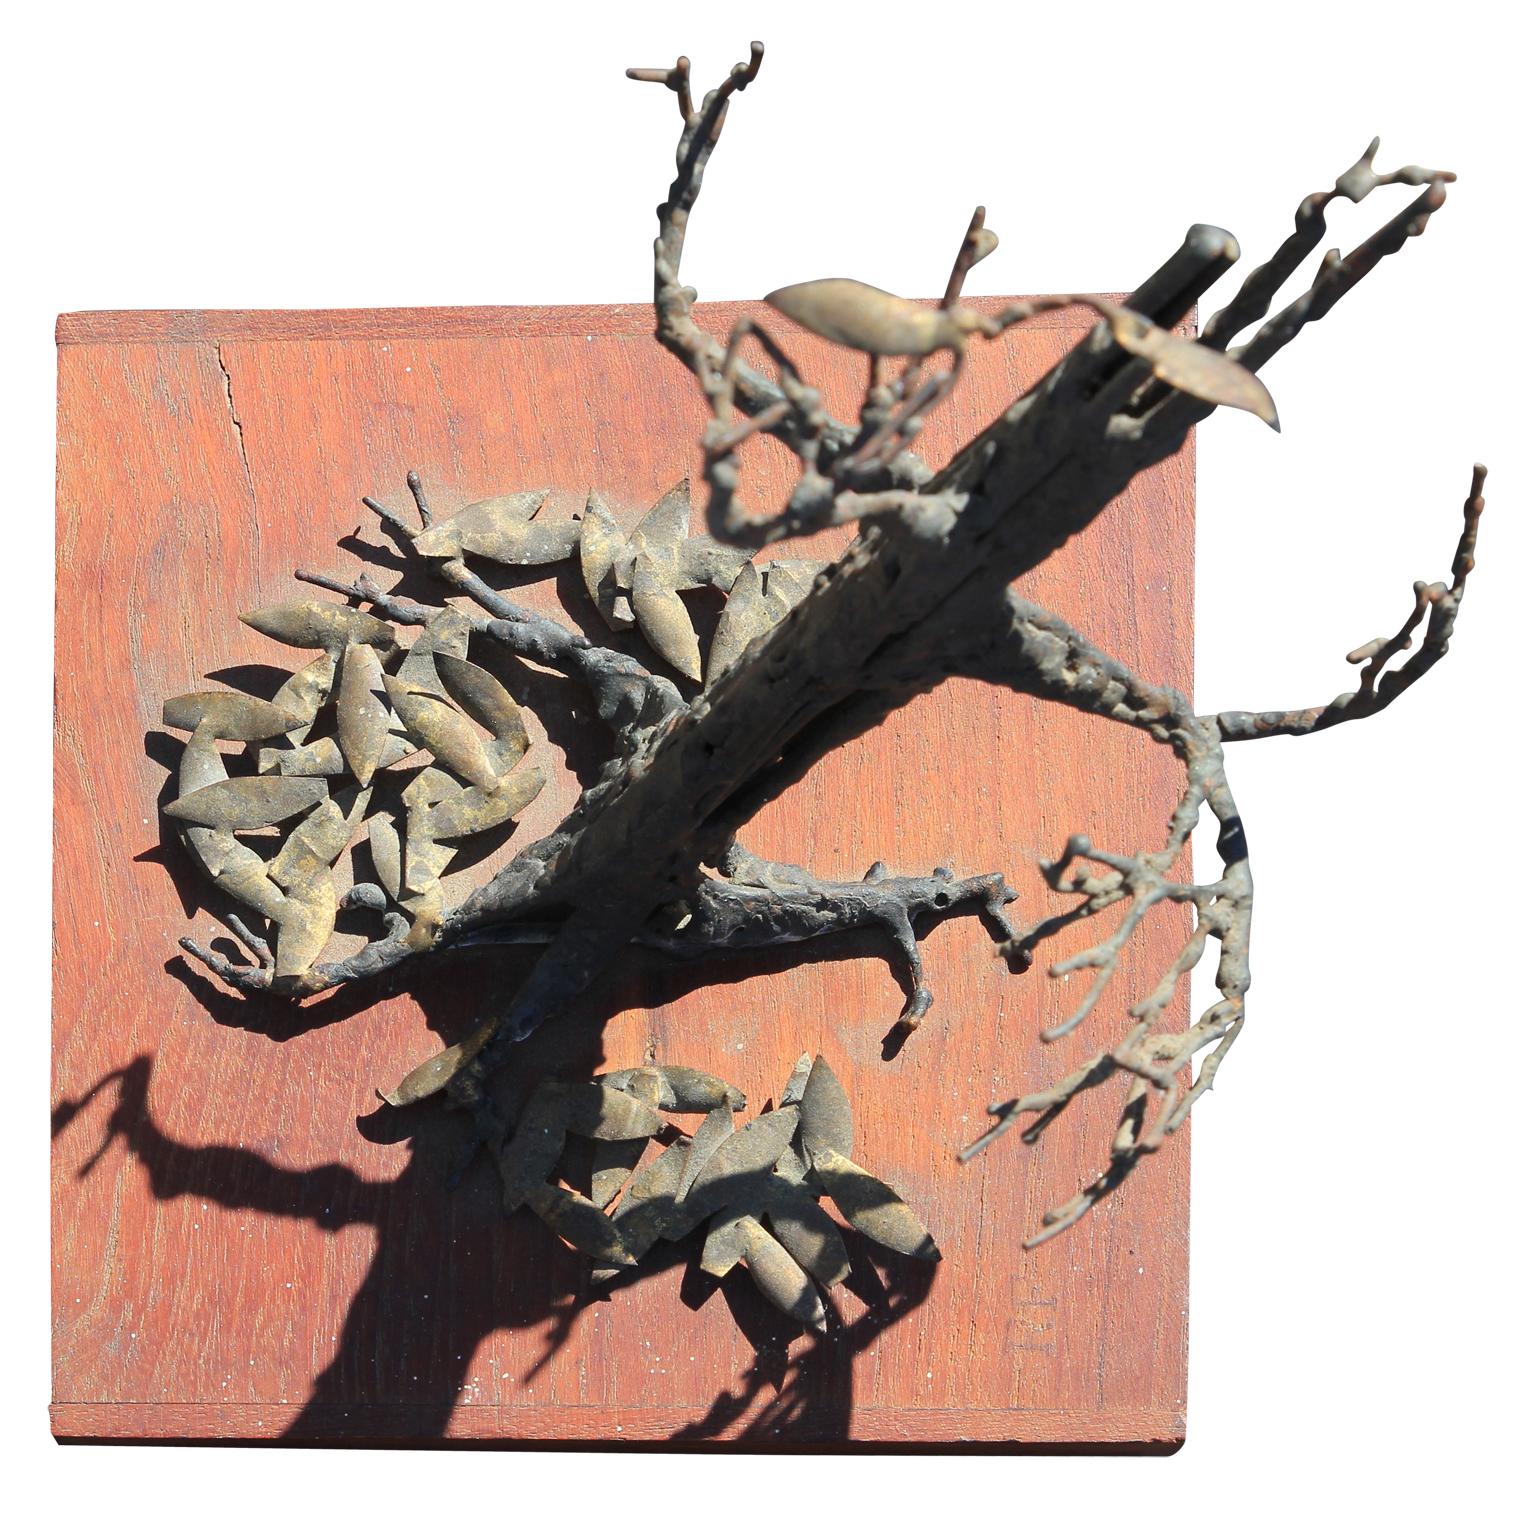 Modern abstract metal sculpture by Houston artist Bob Fowler. The work features a withering tree that has lost its leaves. The brutalist style perfectly captures the energy of the gnarled branches. Firmly attached to a natural wood base. The